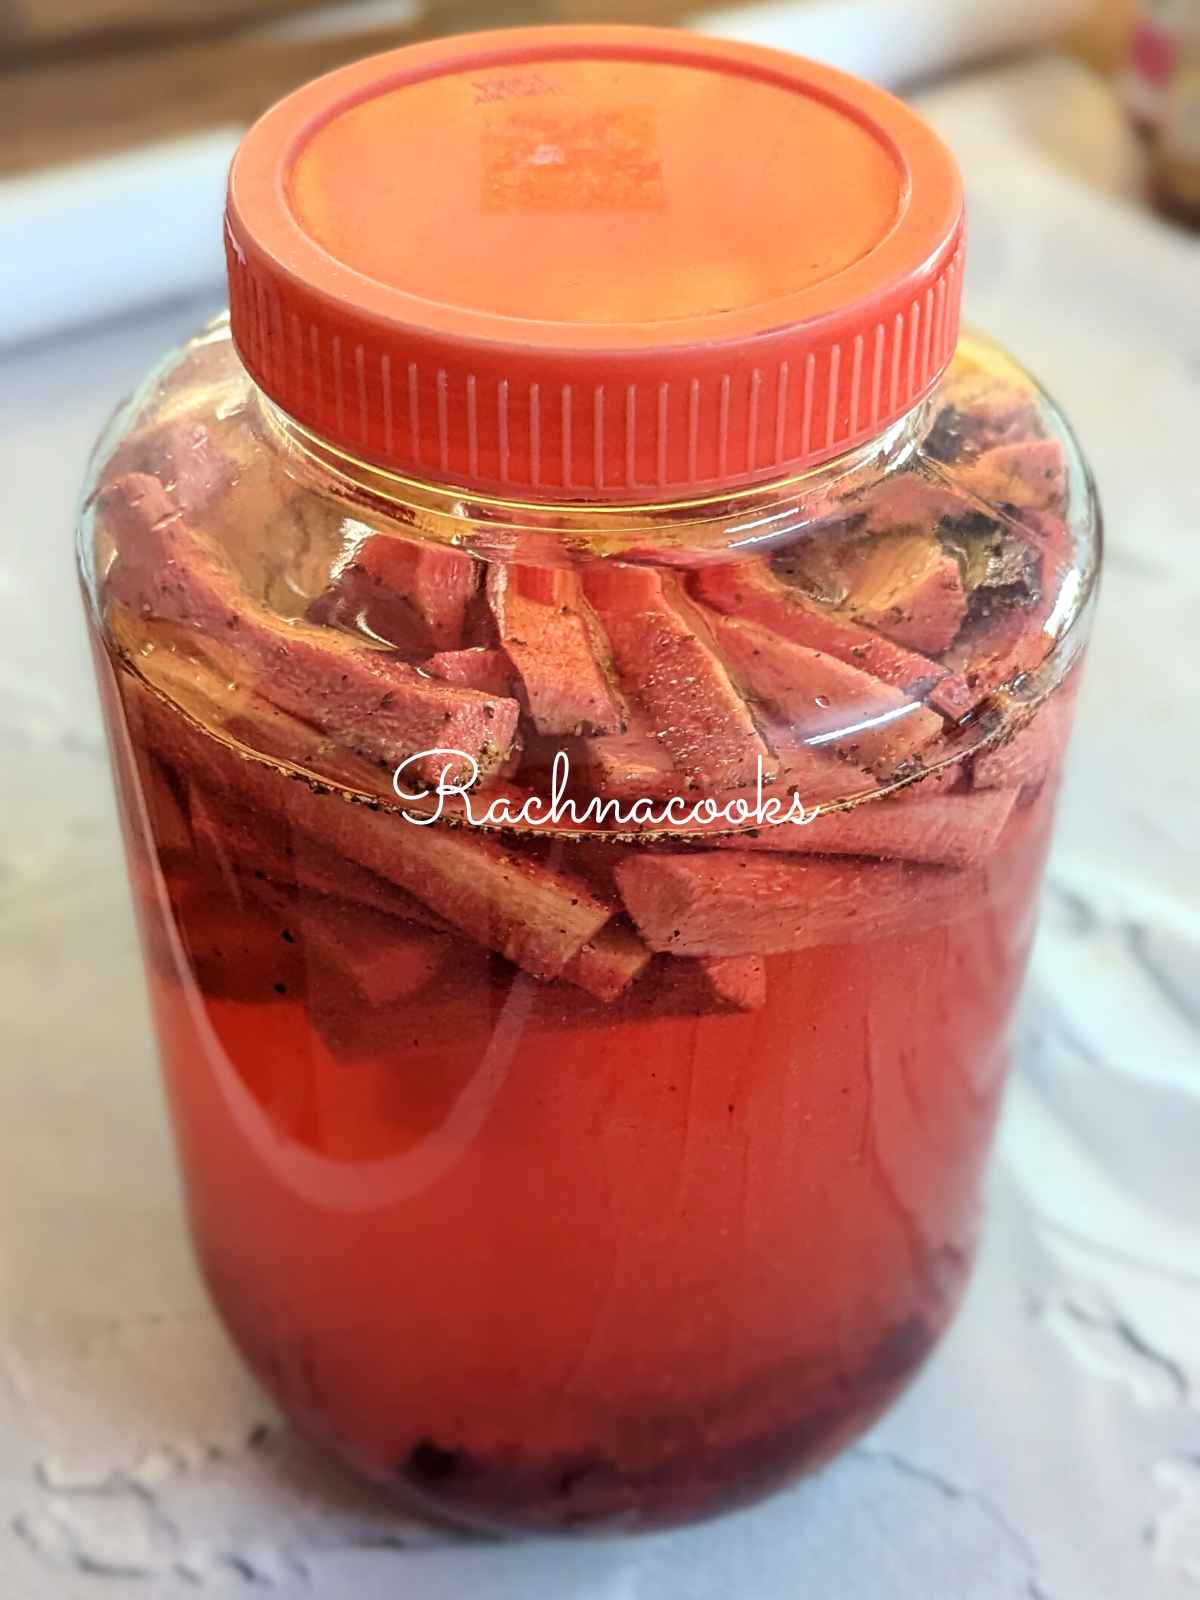 Carrot and beet batons with seasonings, salt and topped up with water in a glass bottle.